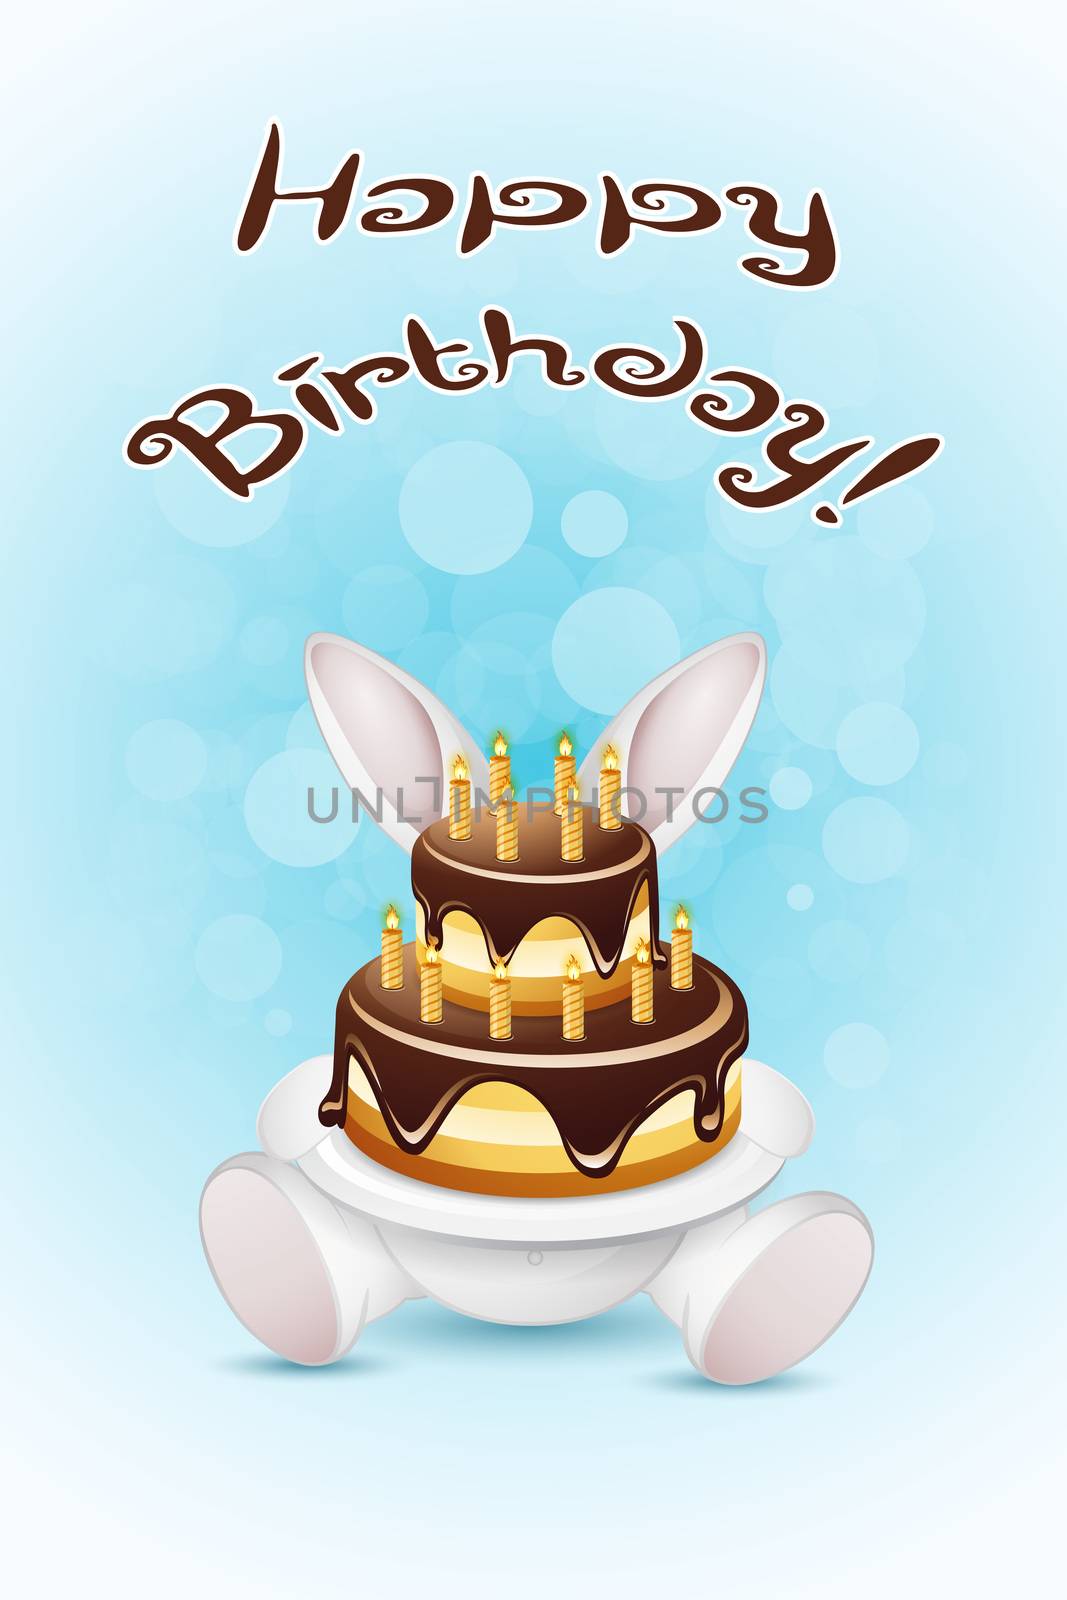 Happy Birthday Card with Cake by WaD